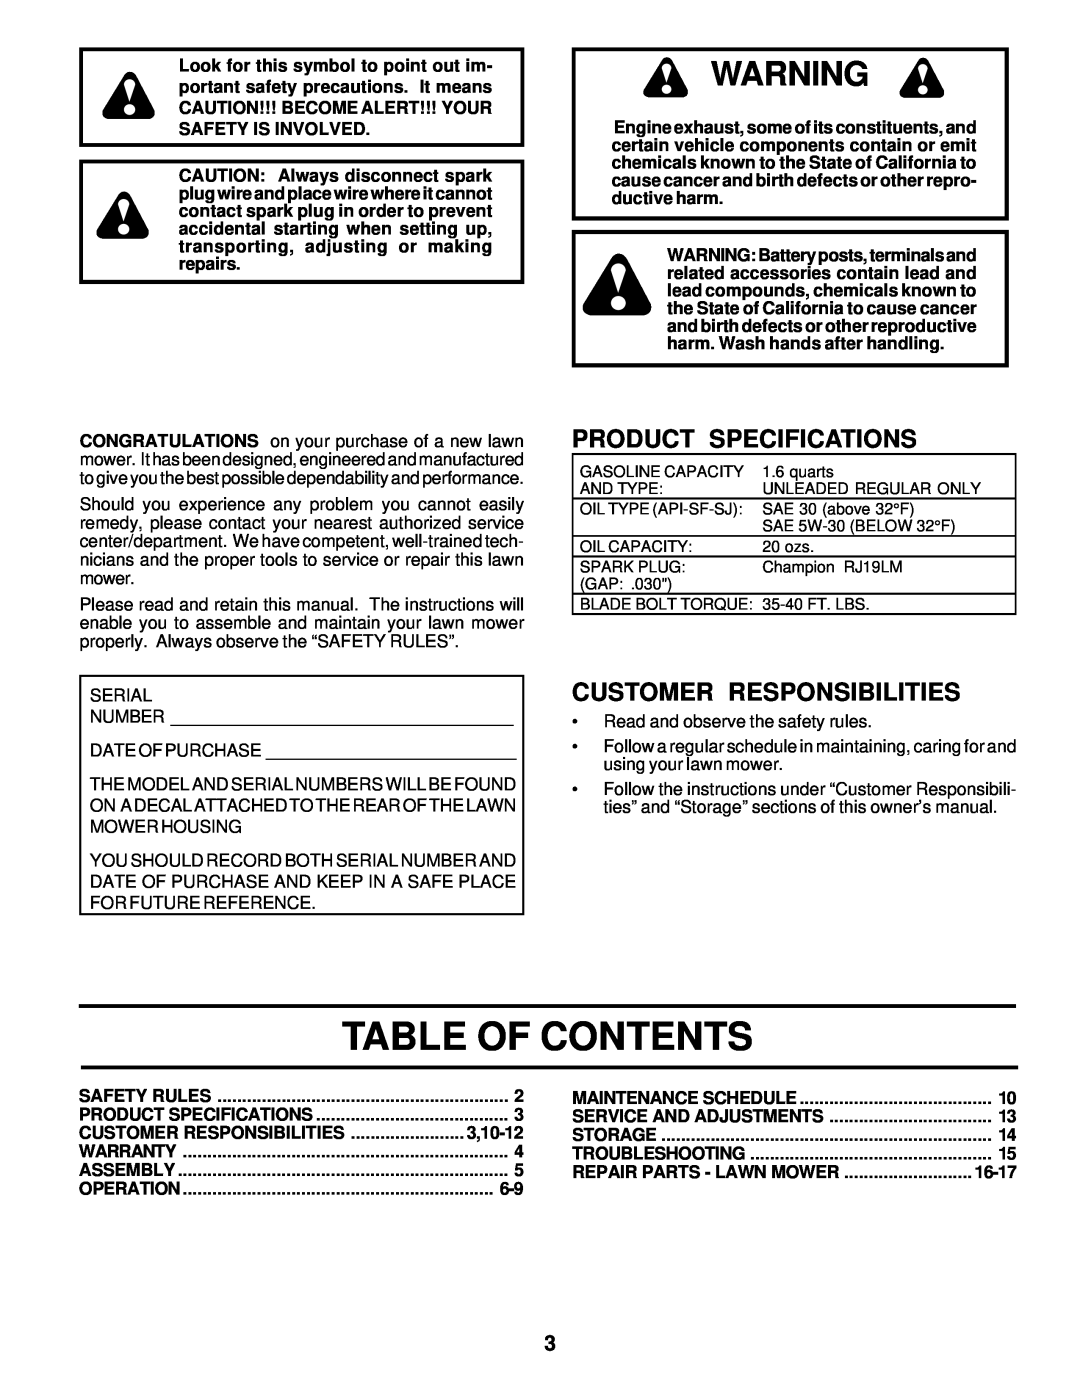 Husqvarna 6022CH owner manual Table Of Contents, Product Specifications, Customer Responsibilities, 3,10-12, 16-17 